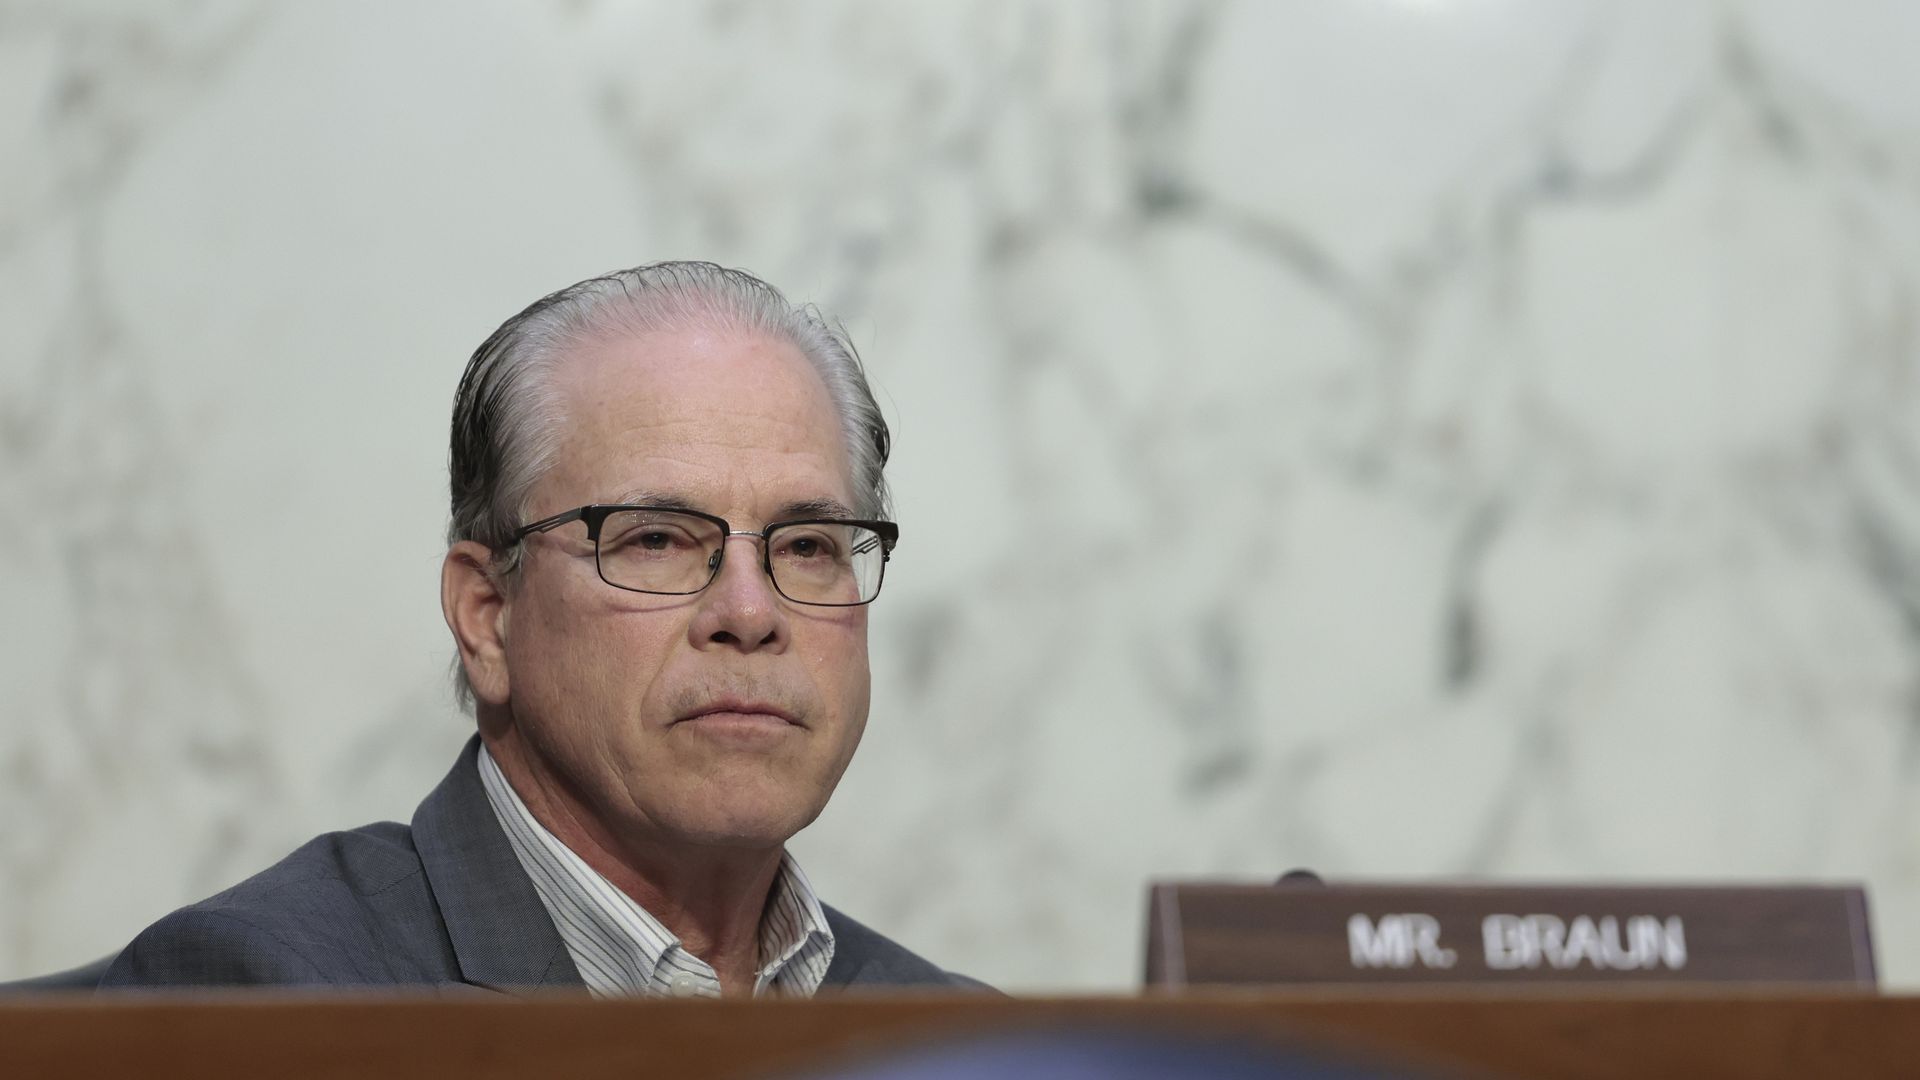 Sen. Mike Braun (R-IN) speaks during a Senate Budget Committee hearing in the Hart Senate Office building on February 17, 2022 in Washington, DC. 